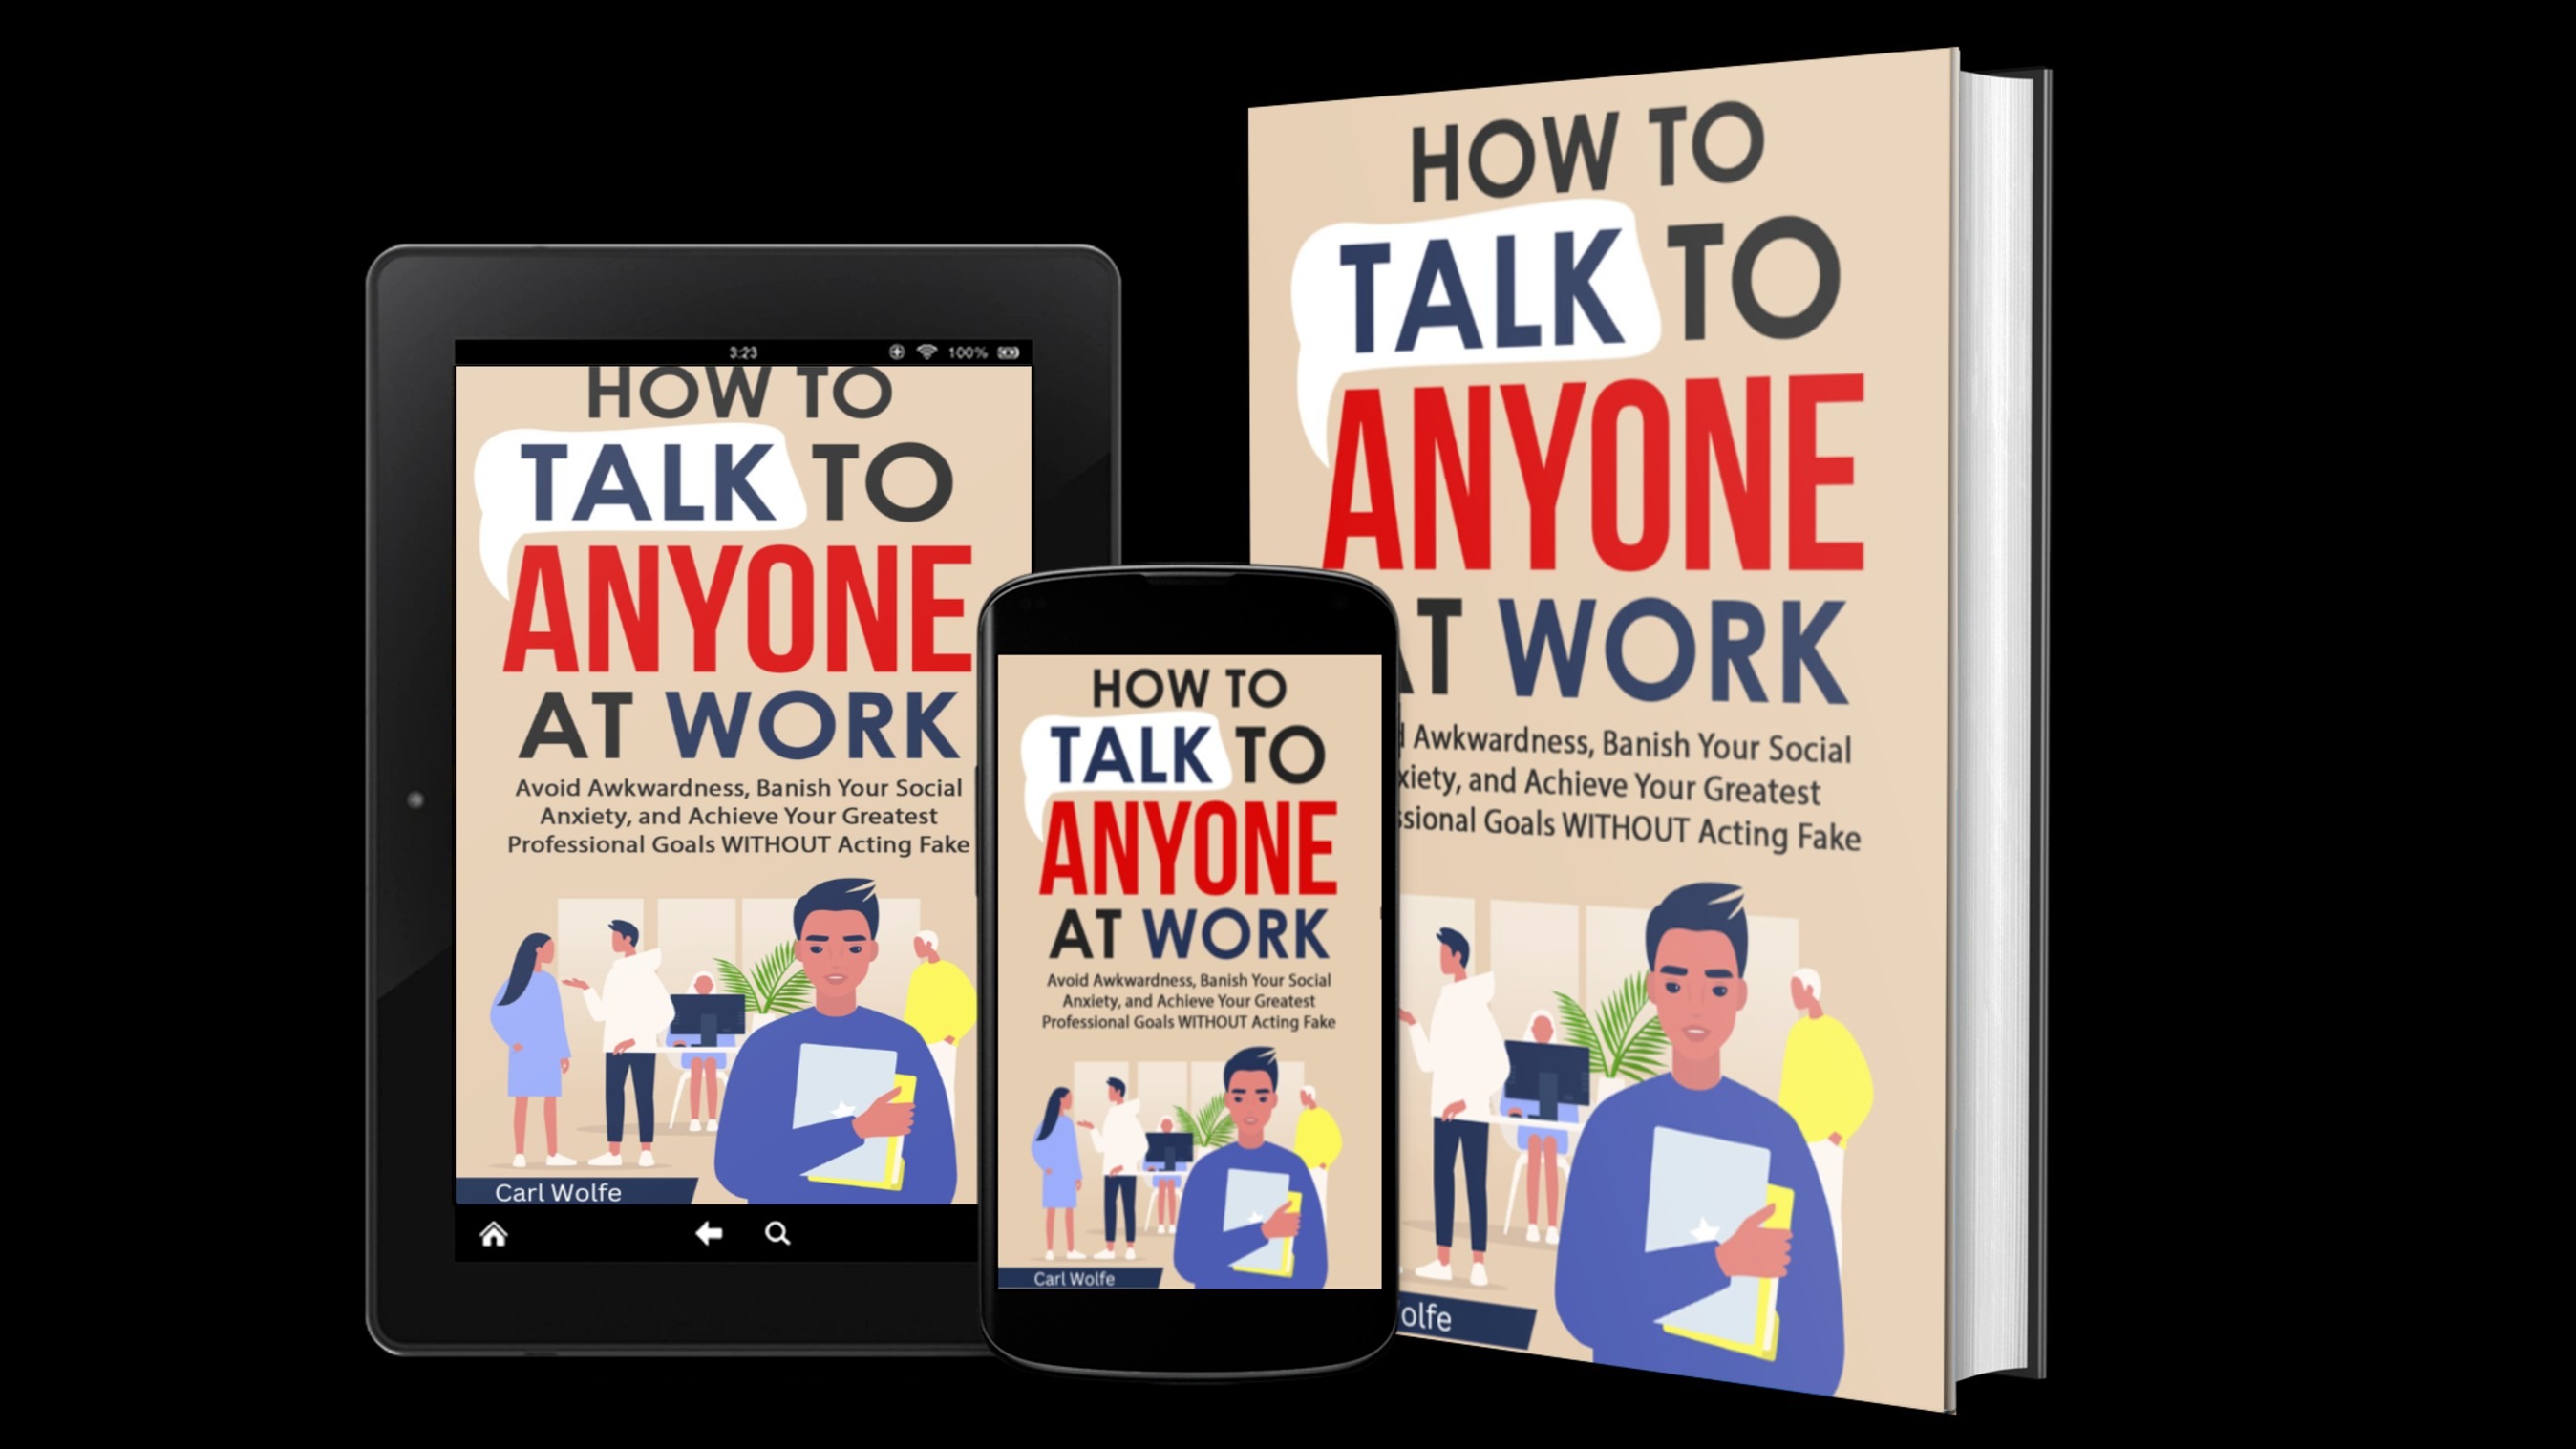 Maximize Your Potential at Work with Carl Wolfe's Proven Strategies -Book Launch